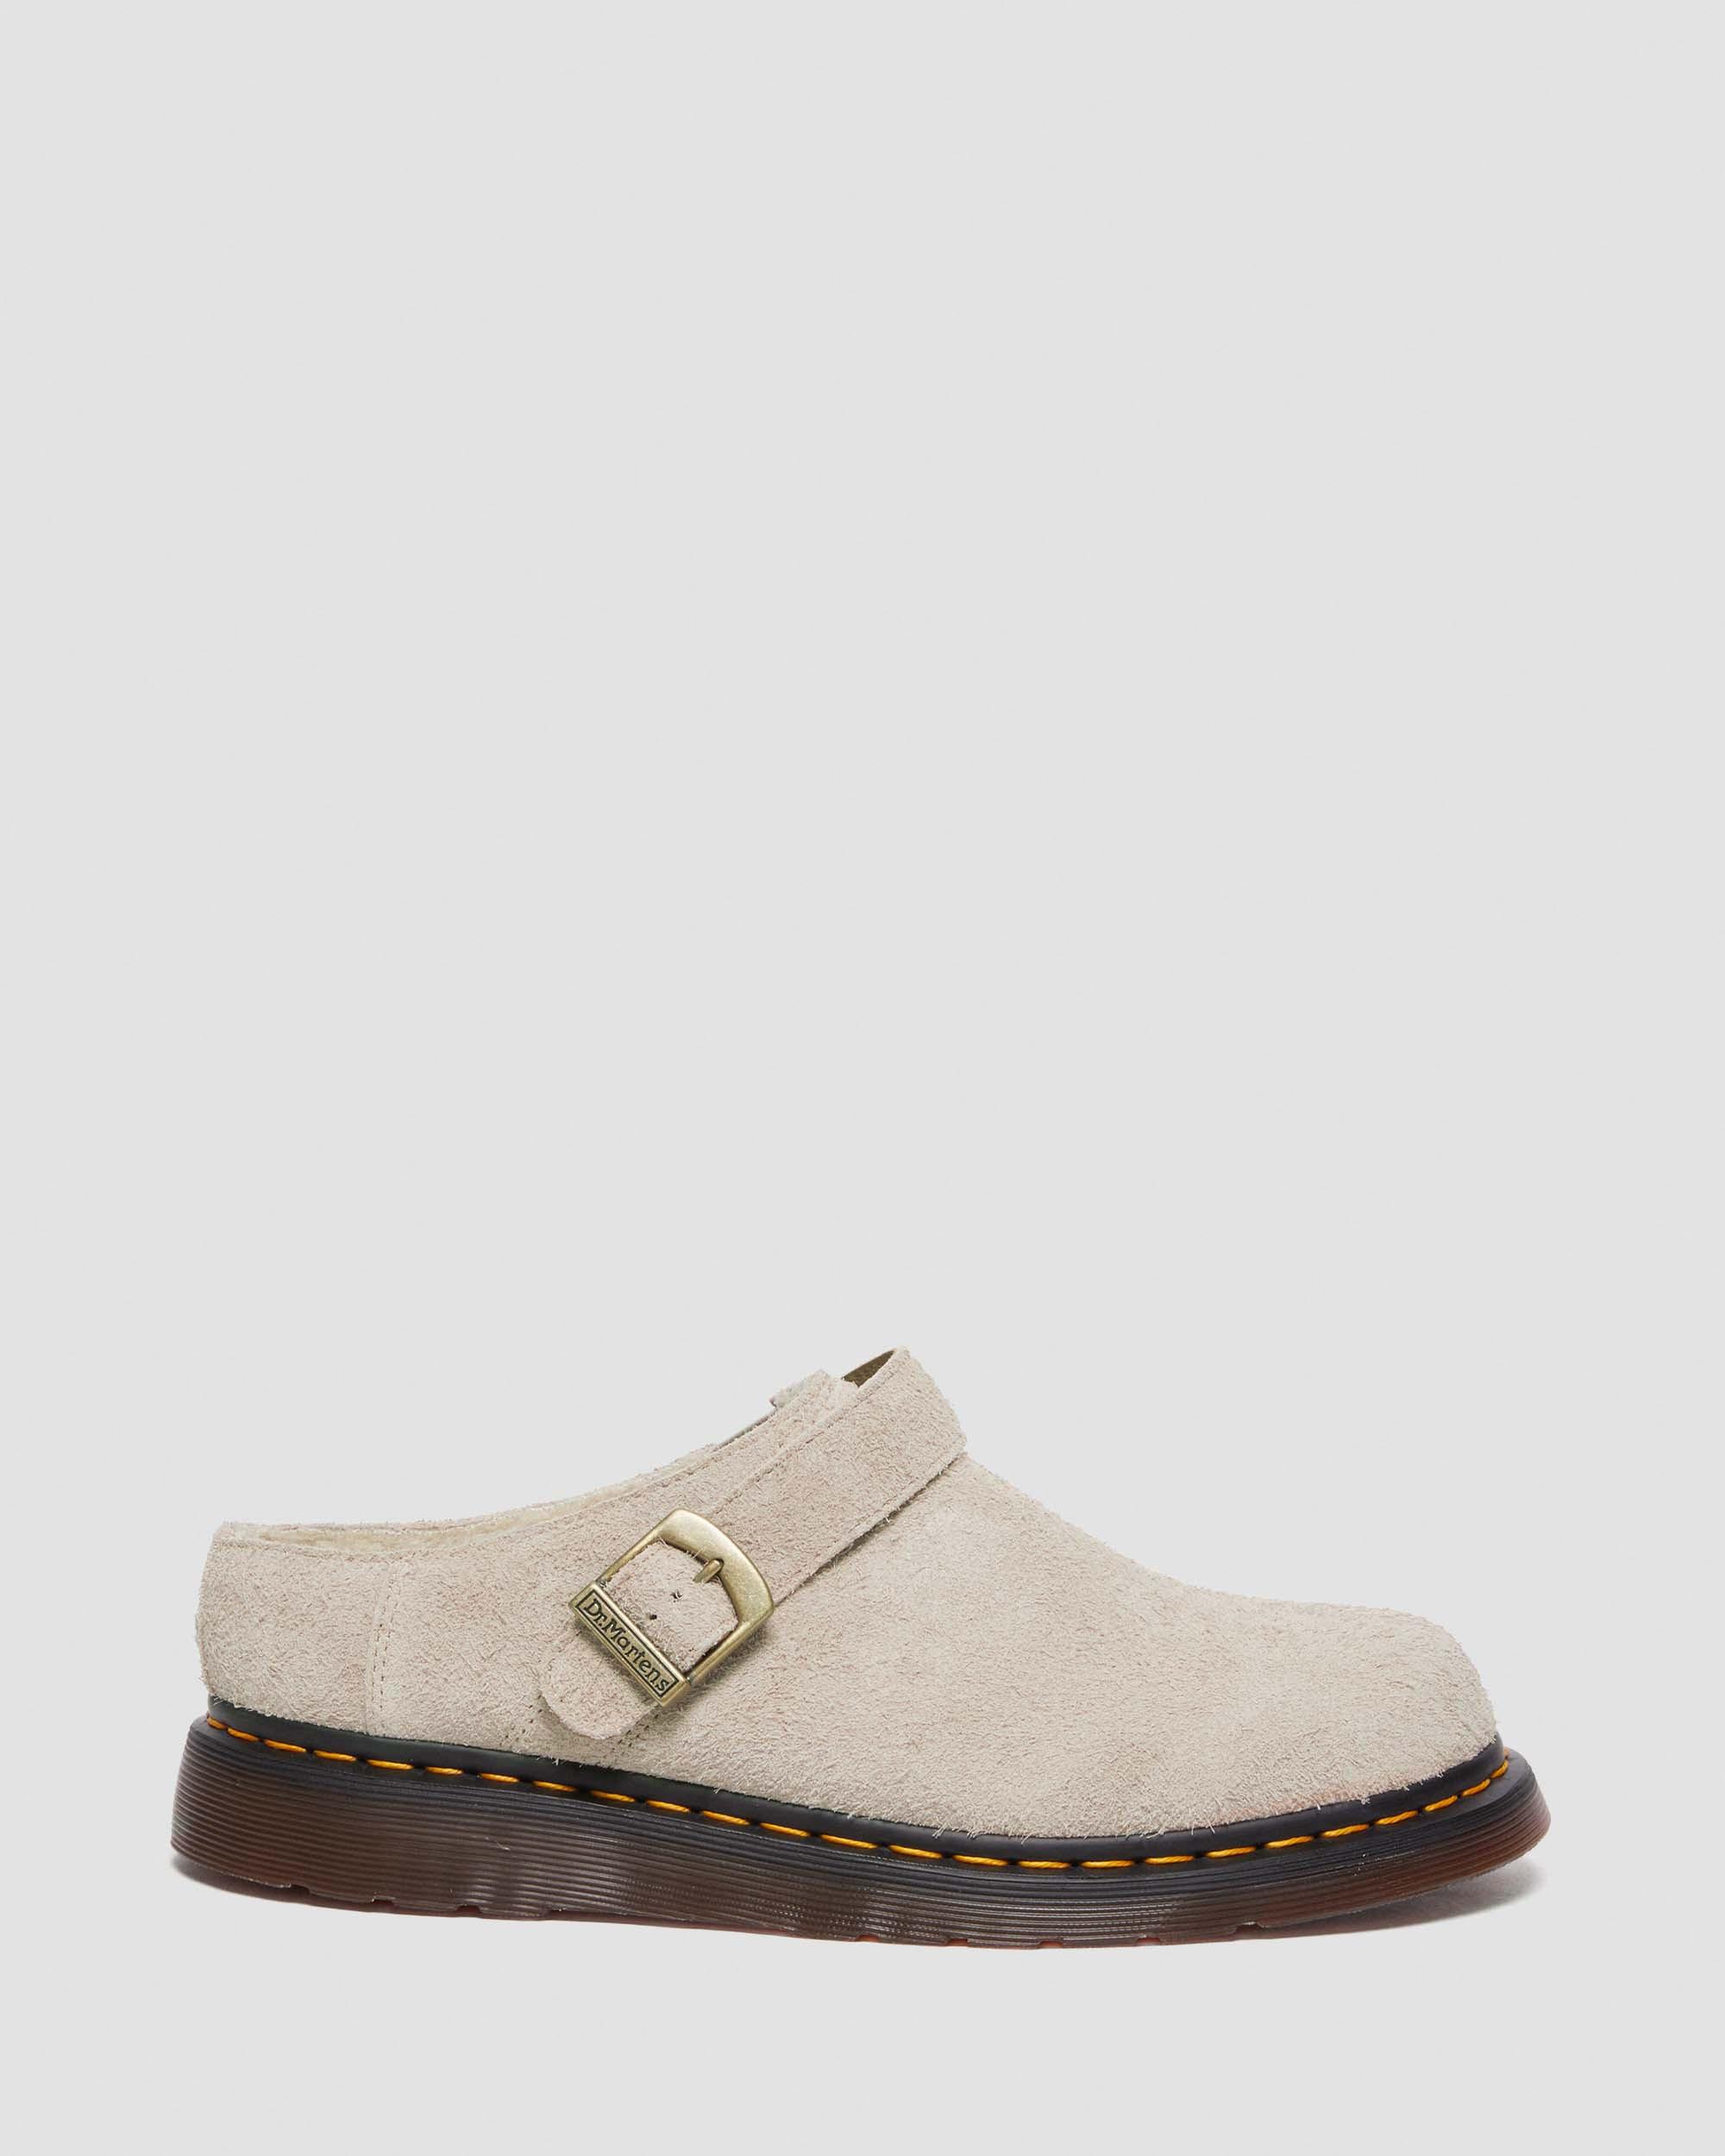 Isham Faux Shearling Lined Suede Mules TaupeIsham Faux Shearling Lined Suede Mules Dr. Martens